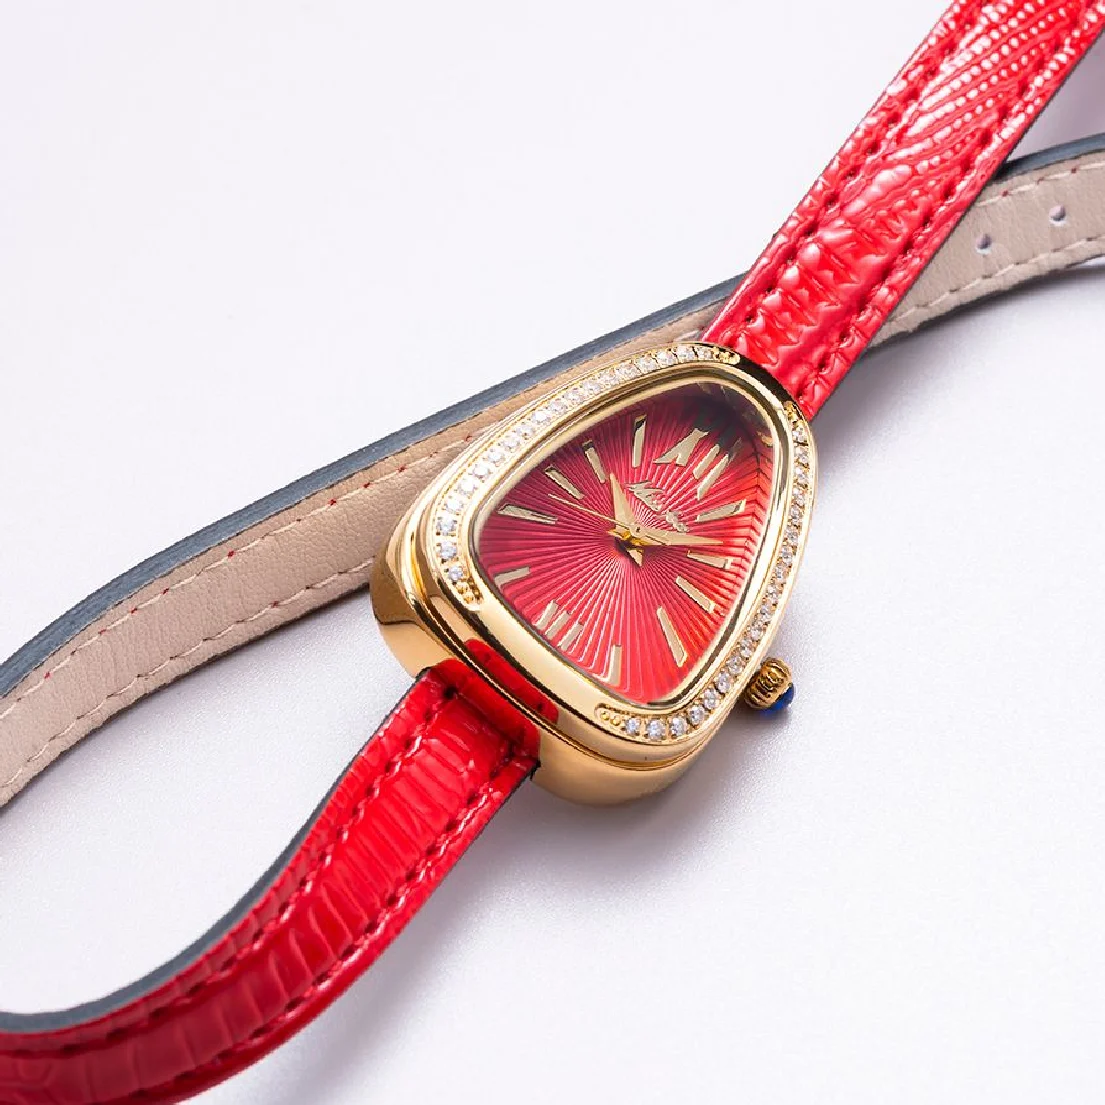 Long Leather Bracelet 18K Gold Plated Snake Bezel Japan Quartz Movement Stainless Steel 30m Waterproof Red Dial Women's Watches